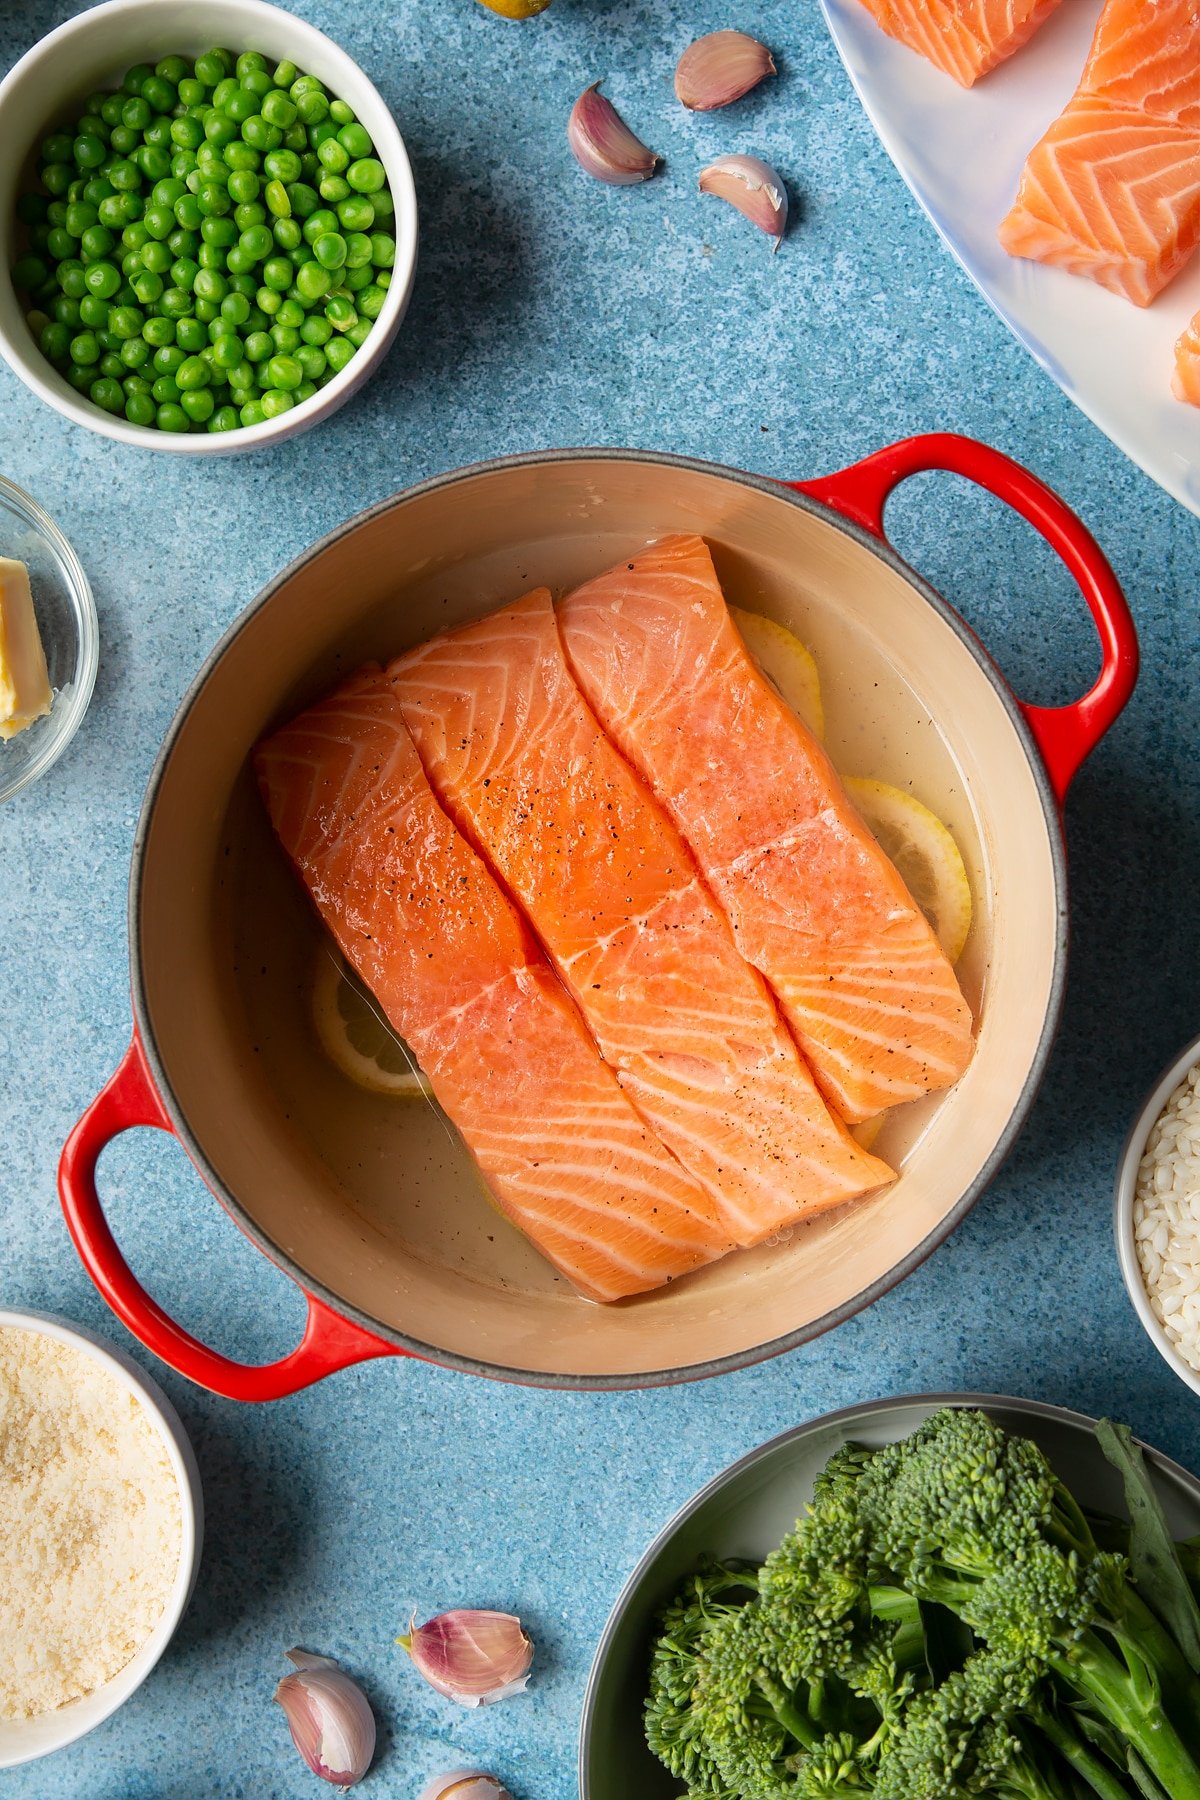 Sliced lemons and hot water in the bottom of a red saucepan with seasoned salmon fillets on top. Ingredients to make salmon risotto surround the pan.